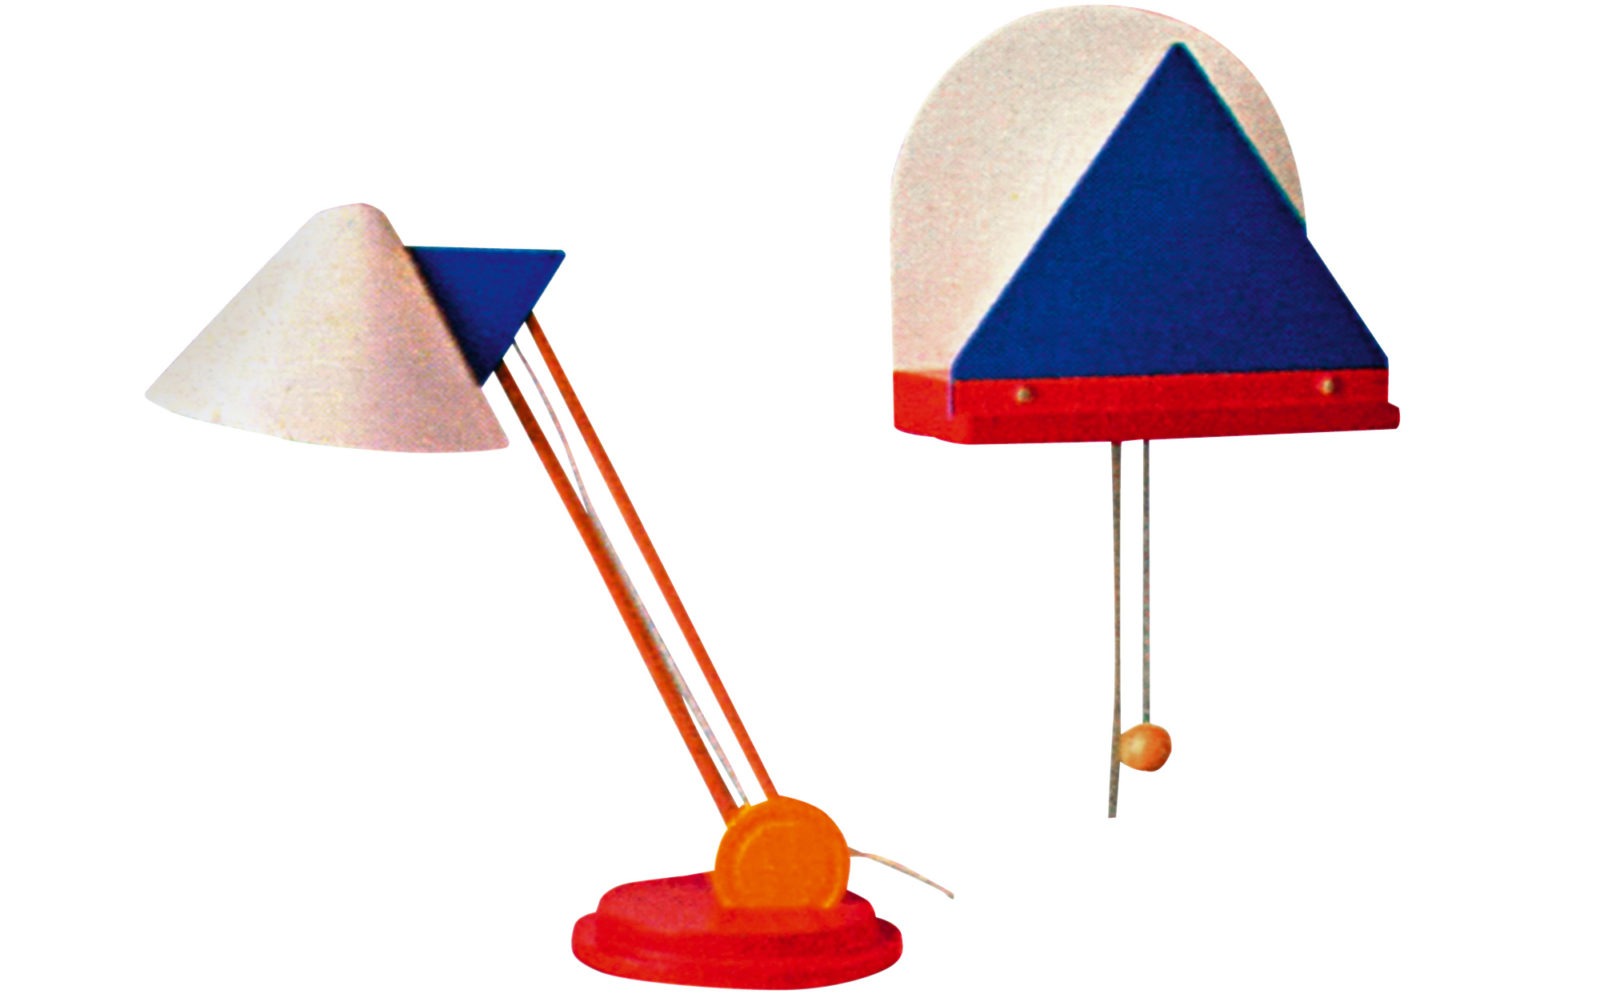 Children's lamps, one wall lamp and one table lamp, in bright white, orange and blue, STOJA.